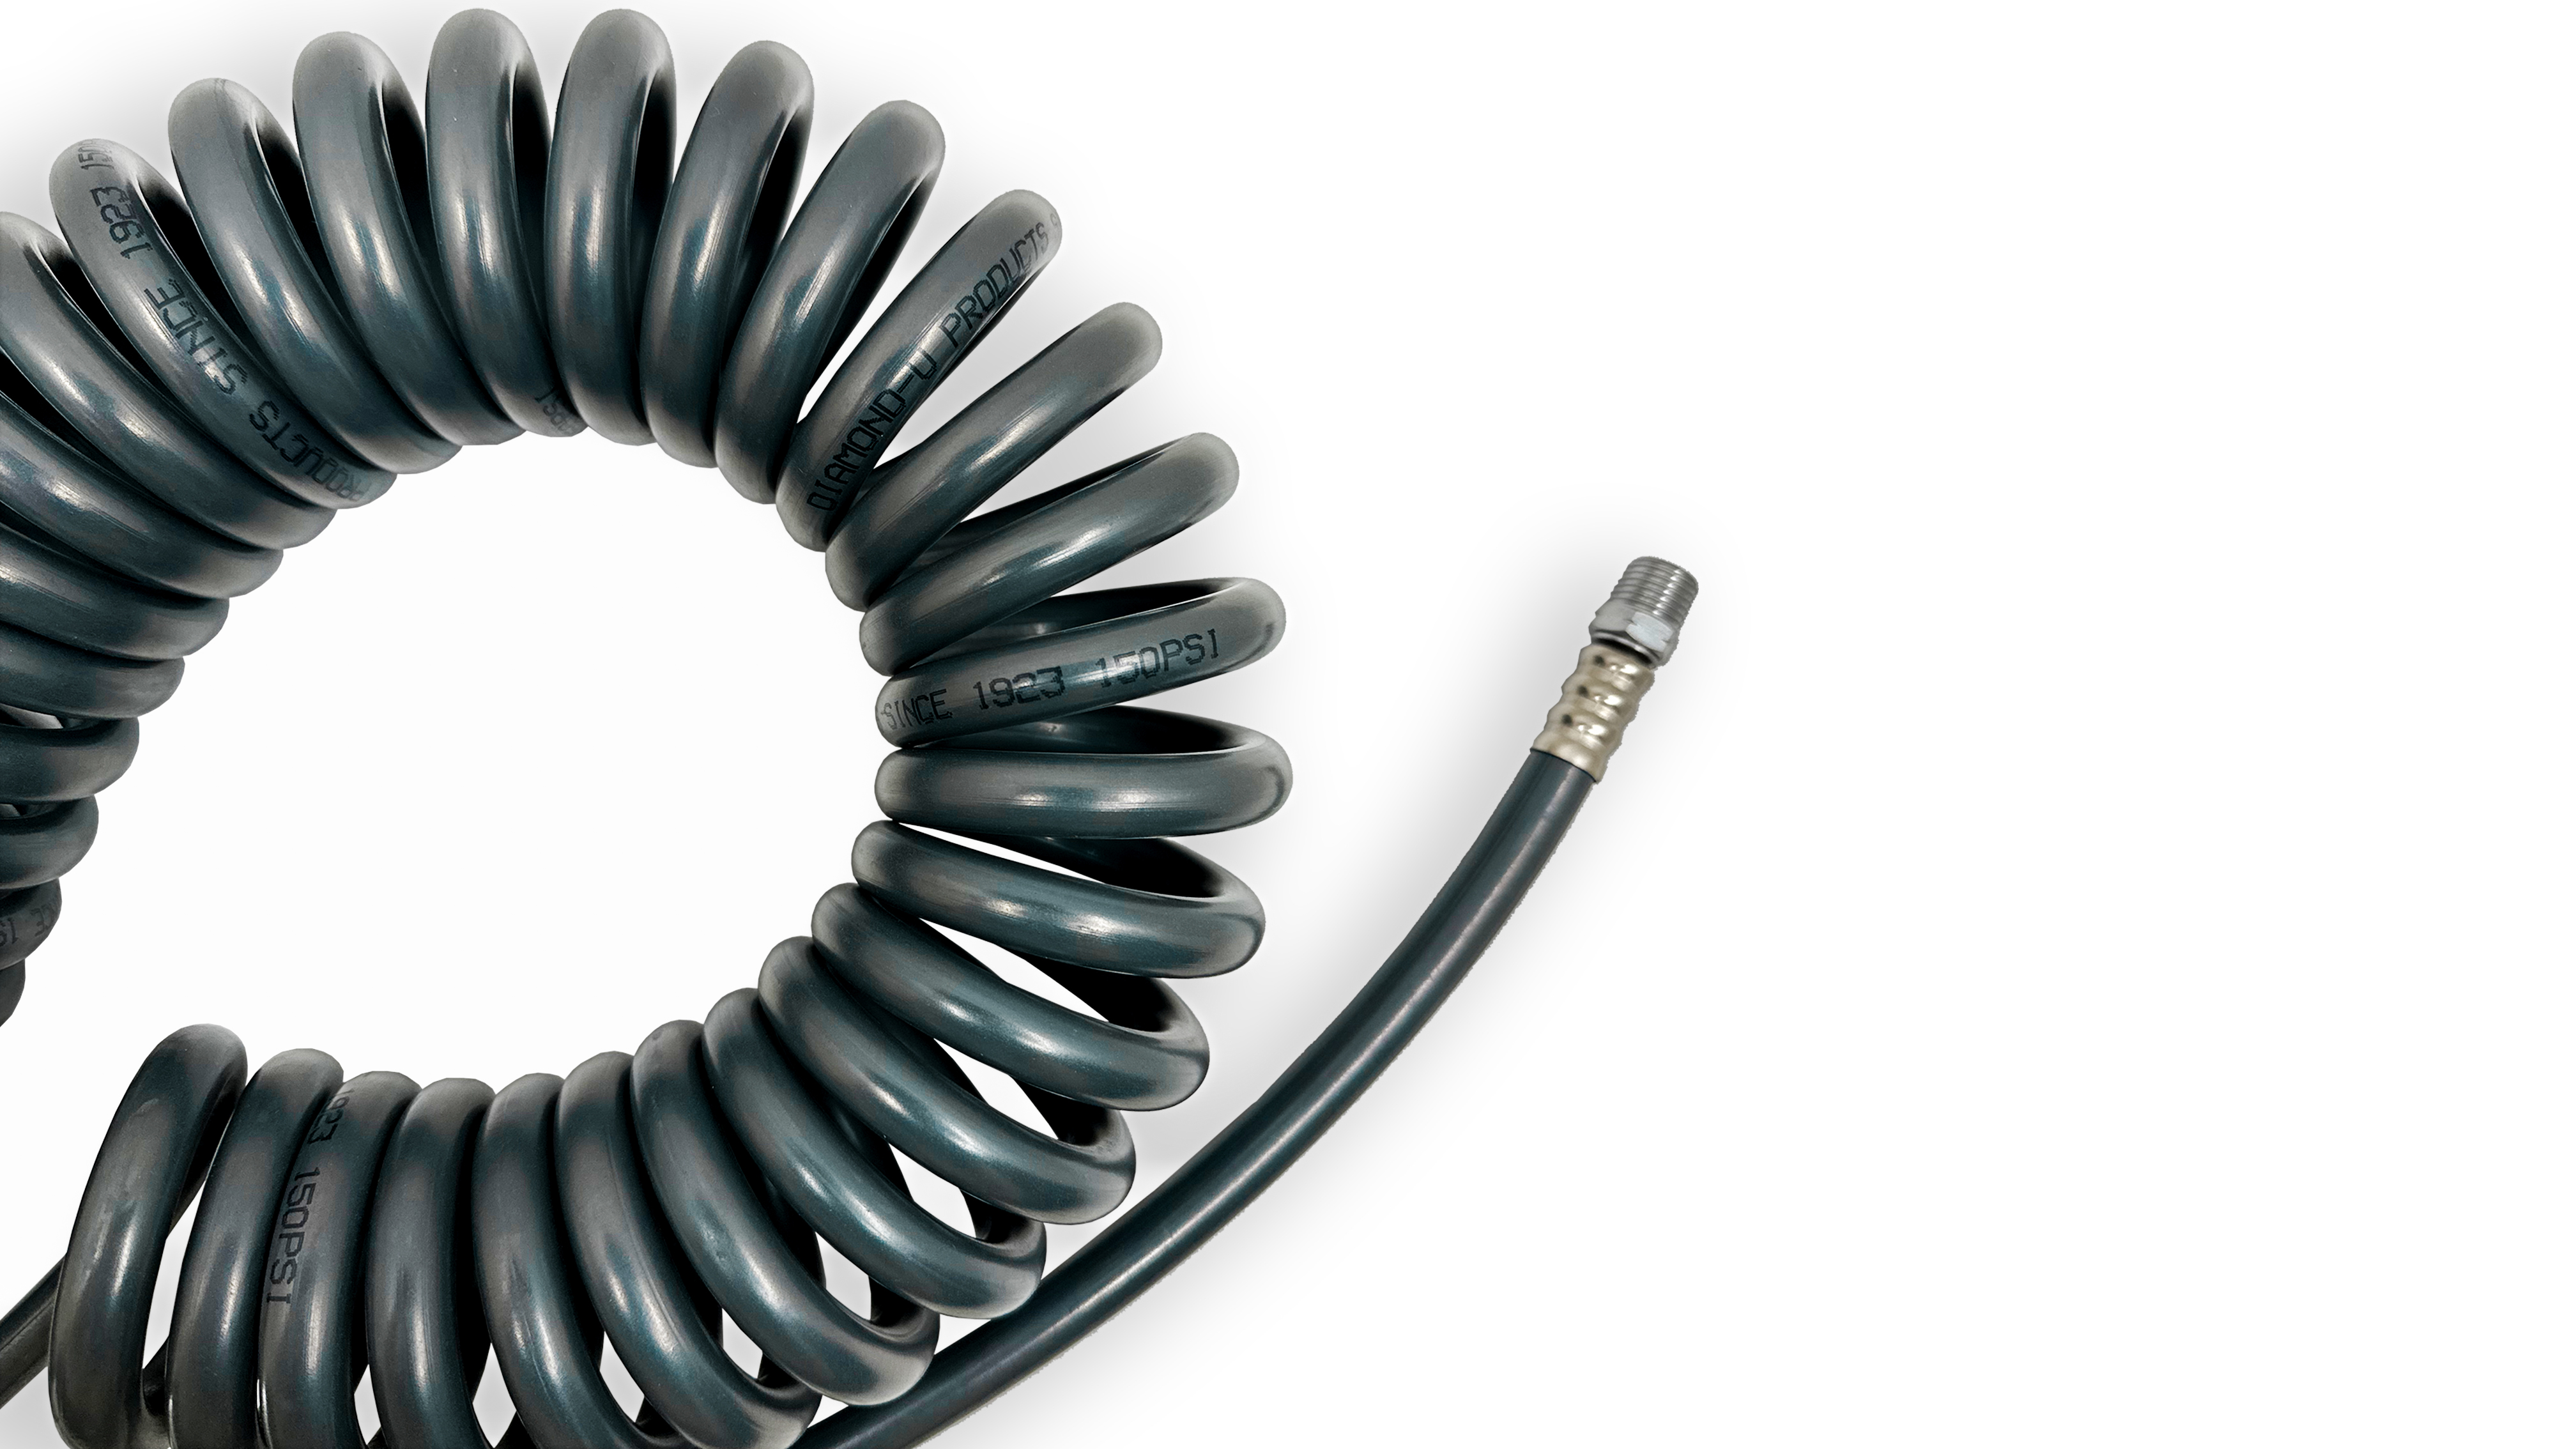 Heavy Duty Coiled Hose for Air Machines & Water Machines